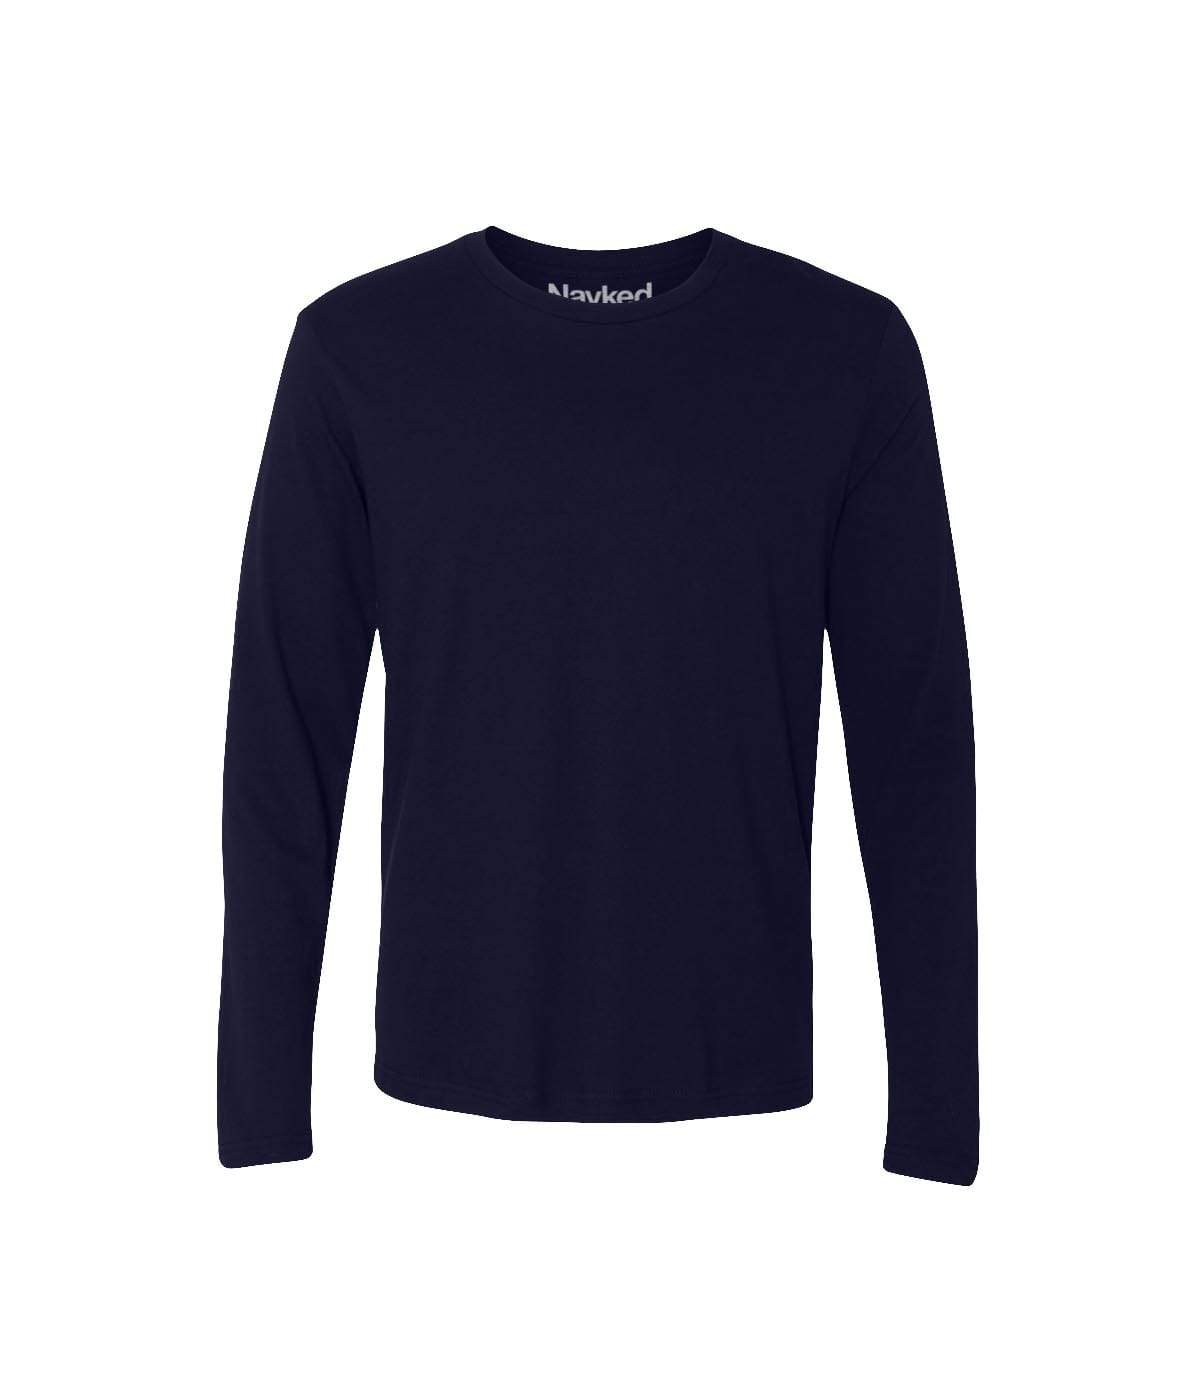 nål Resonate afslappet Mens Ridiculously Soft Long Sleeve 100% Cotton T-Shirt - Nayked Apparel